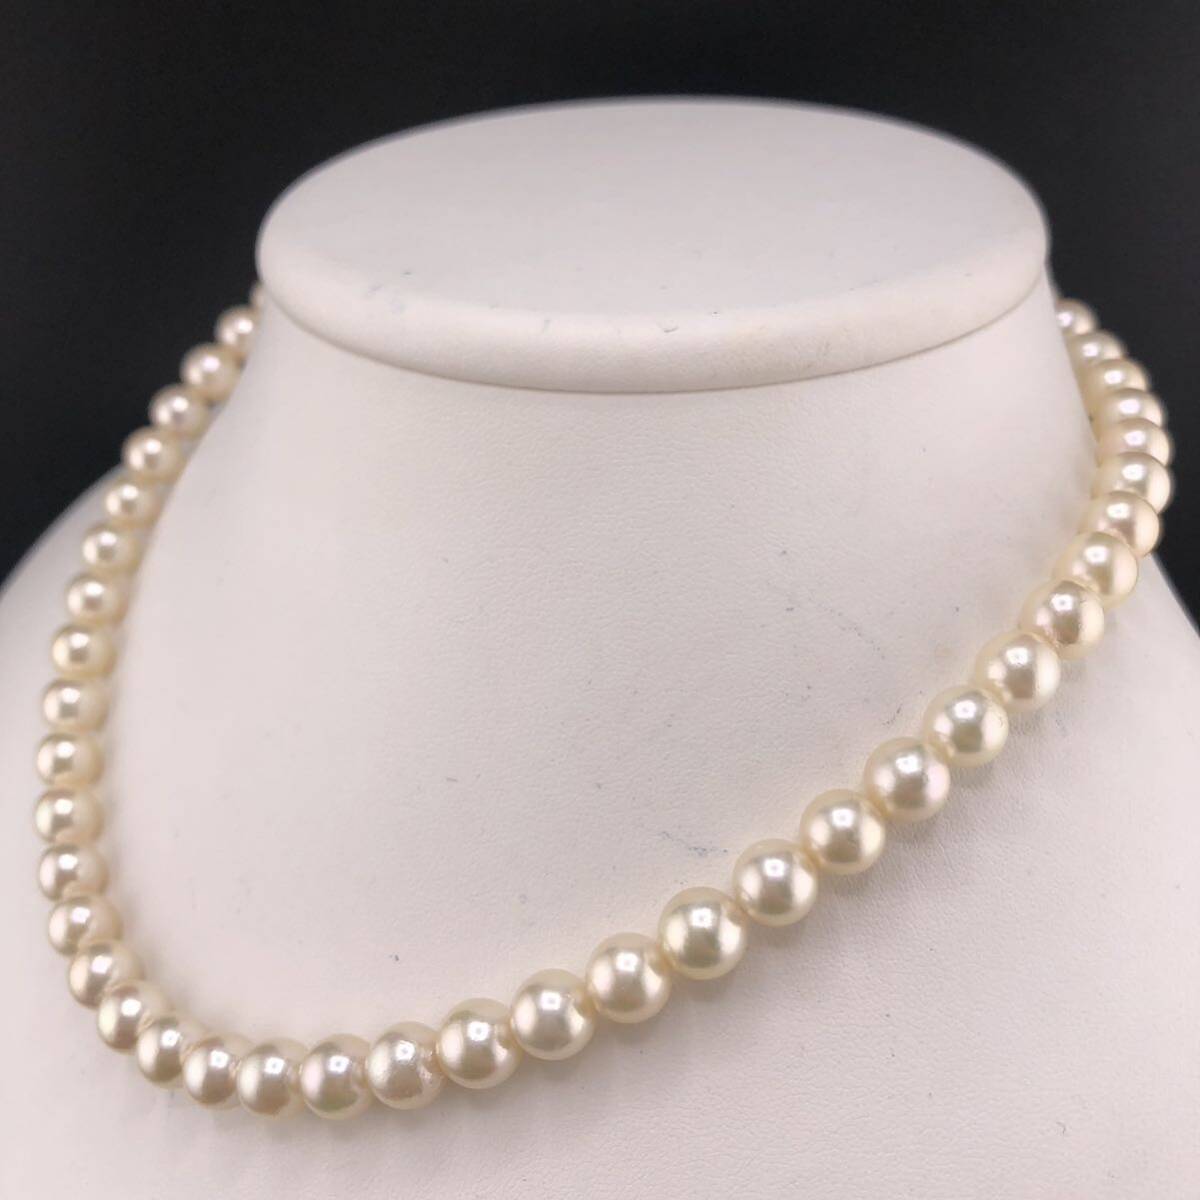 E04-8215 アコヤパールネックレス 7.5mm~8.0mm 40cm 37.3g ( アコヤ真珠 Pearl necklace SILVER )の画像2